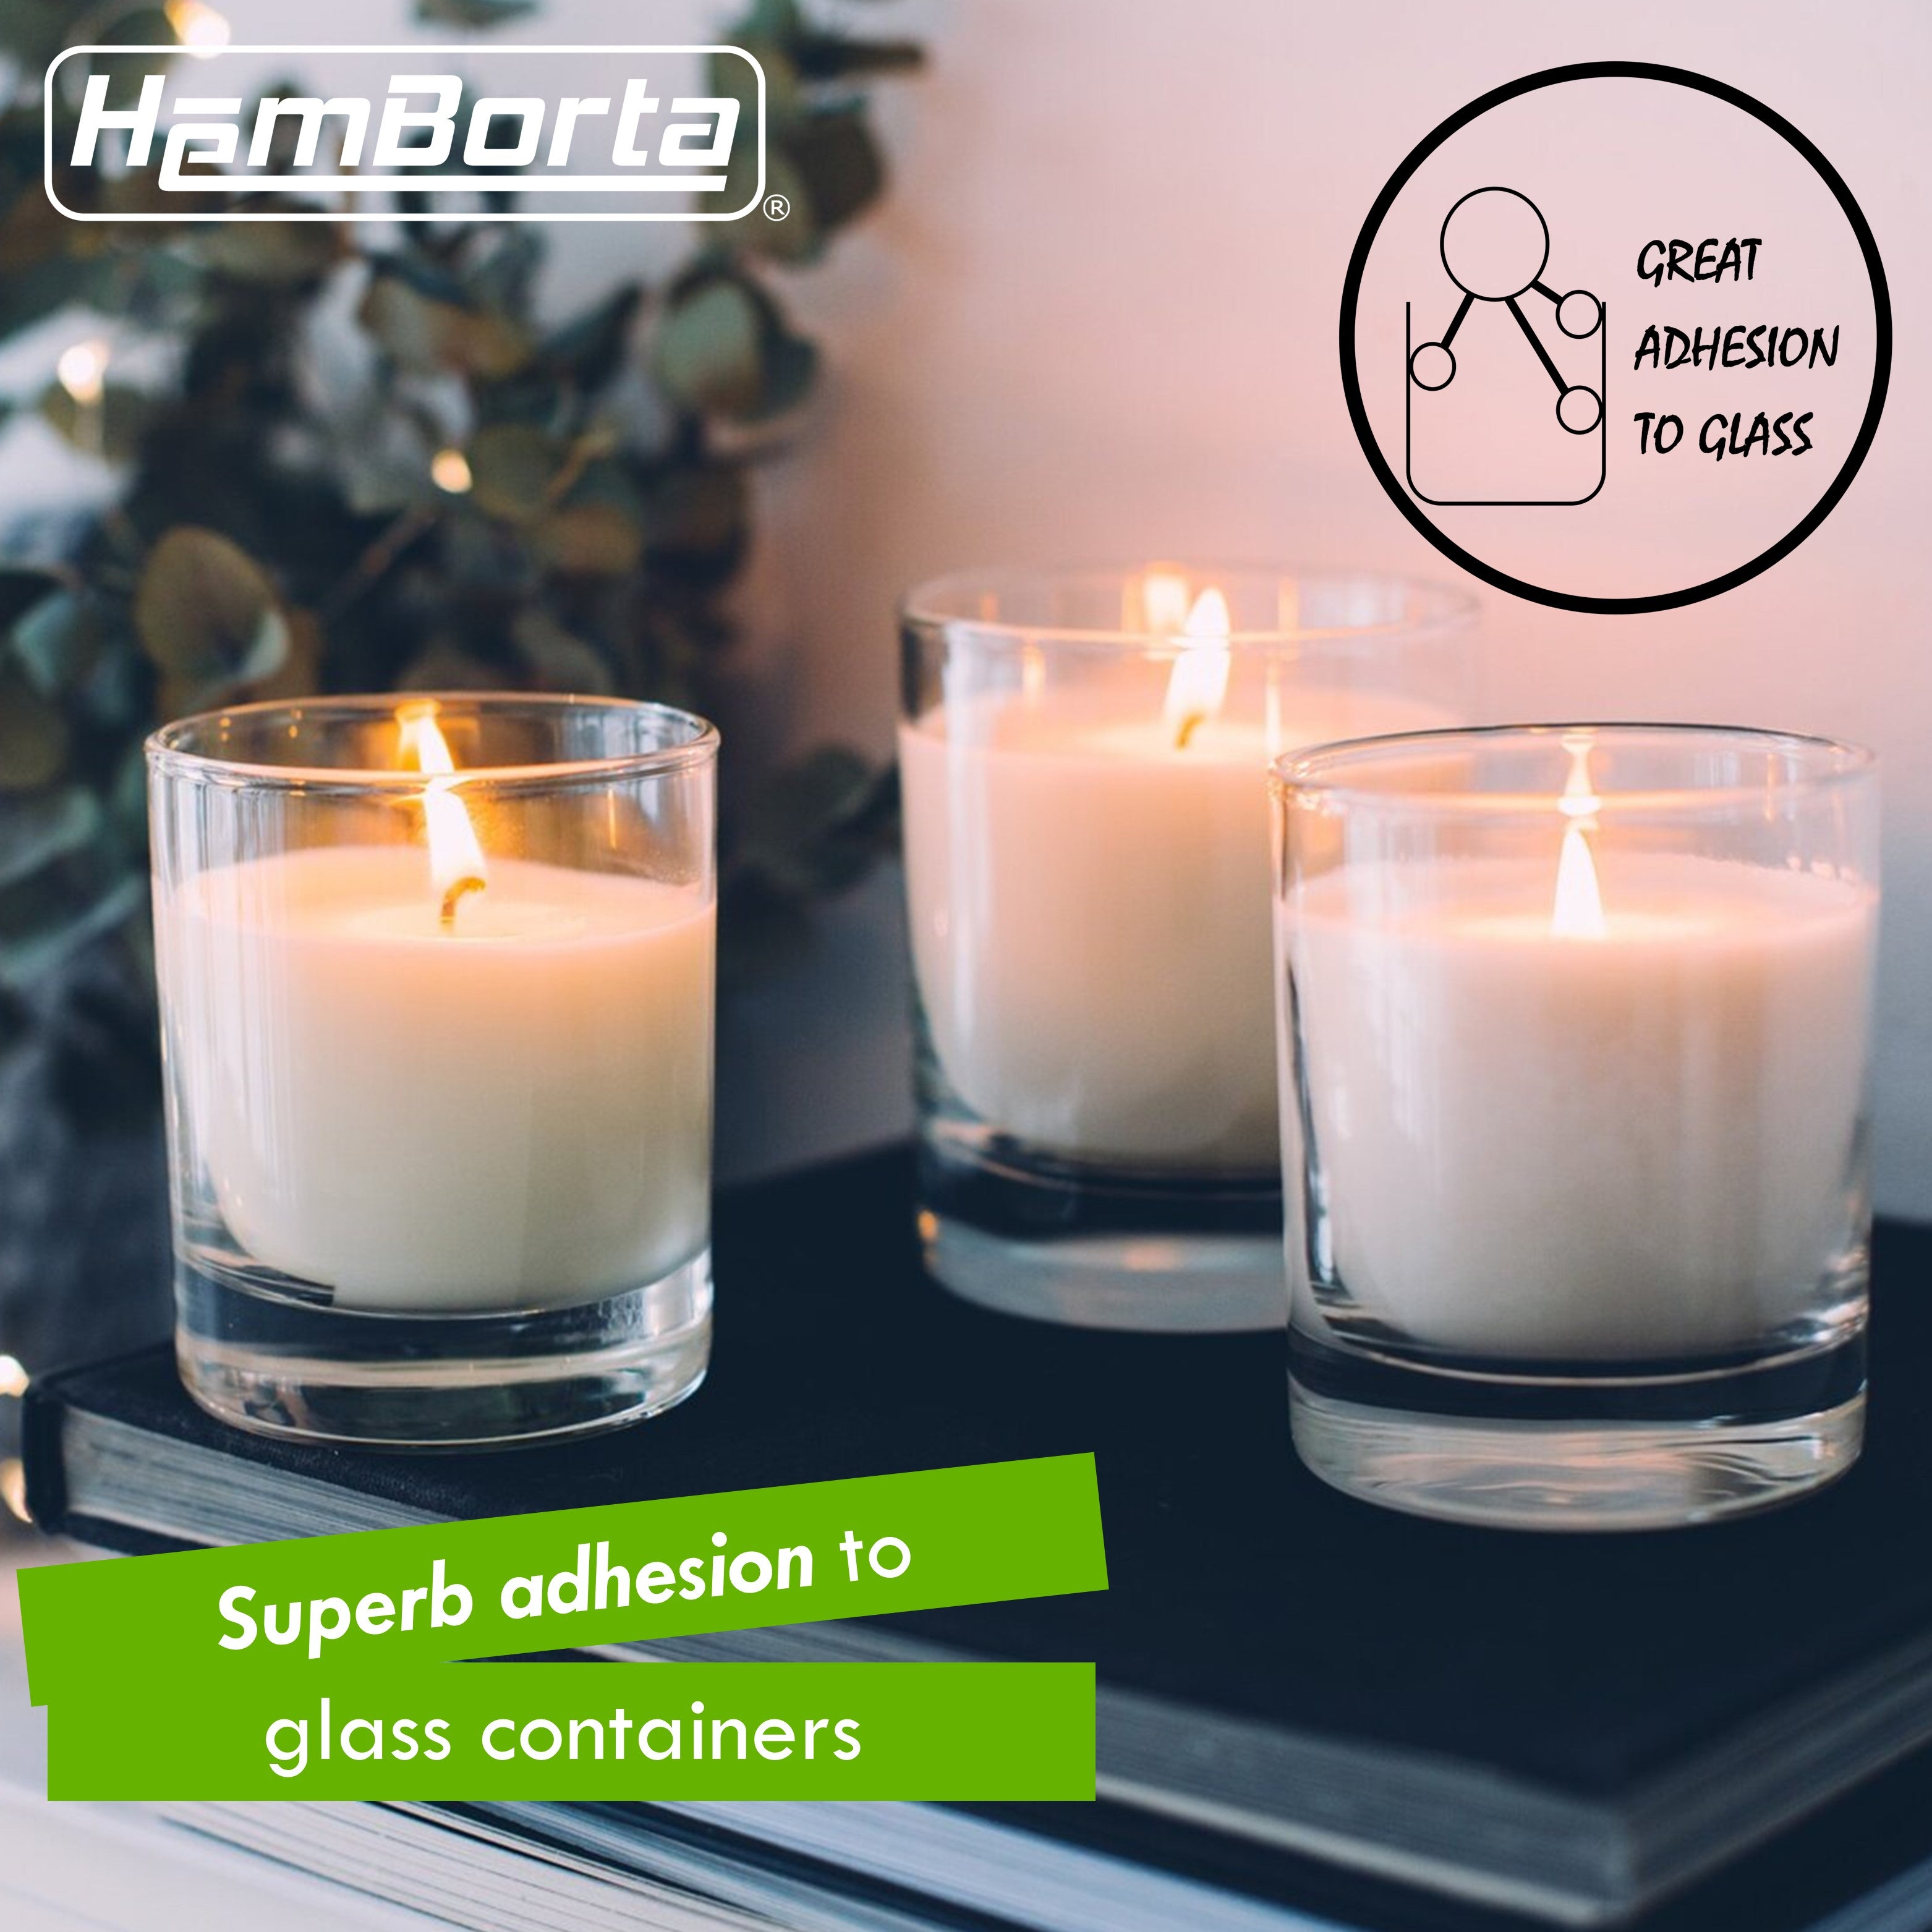 HemBorta soy wax has superb adhesion to glass containers